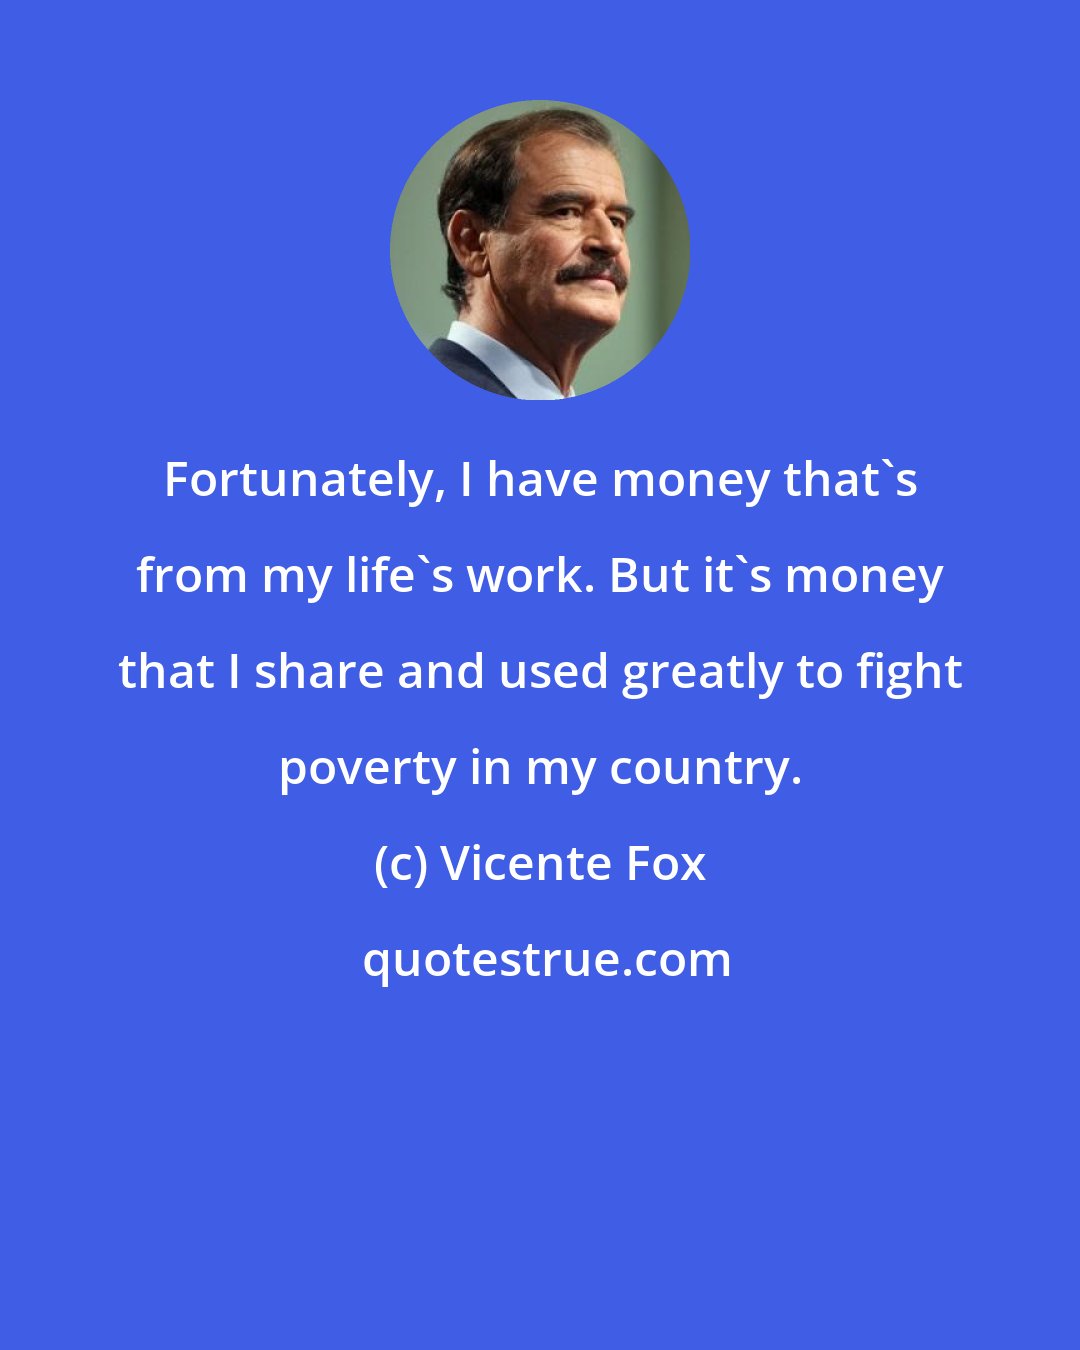 Vicente Fox: Fortunately, I have money that's from my life's work. But it's money that I share and used greatly to fight poverty in my country.